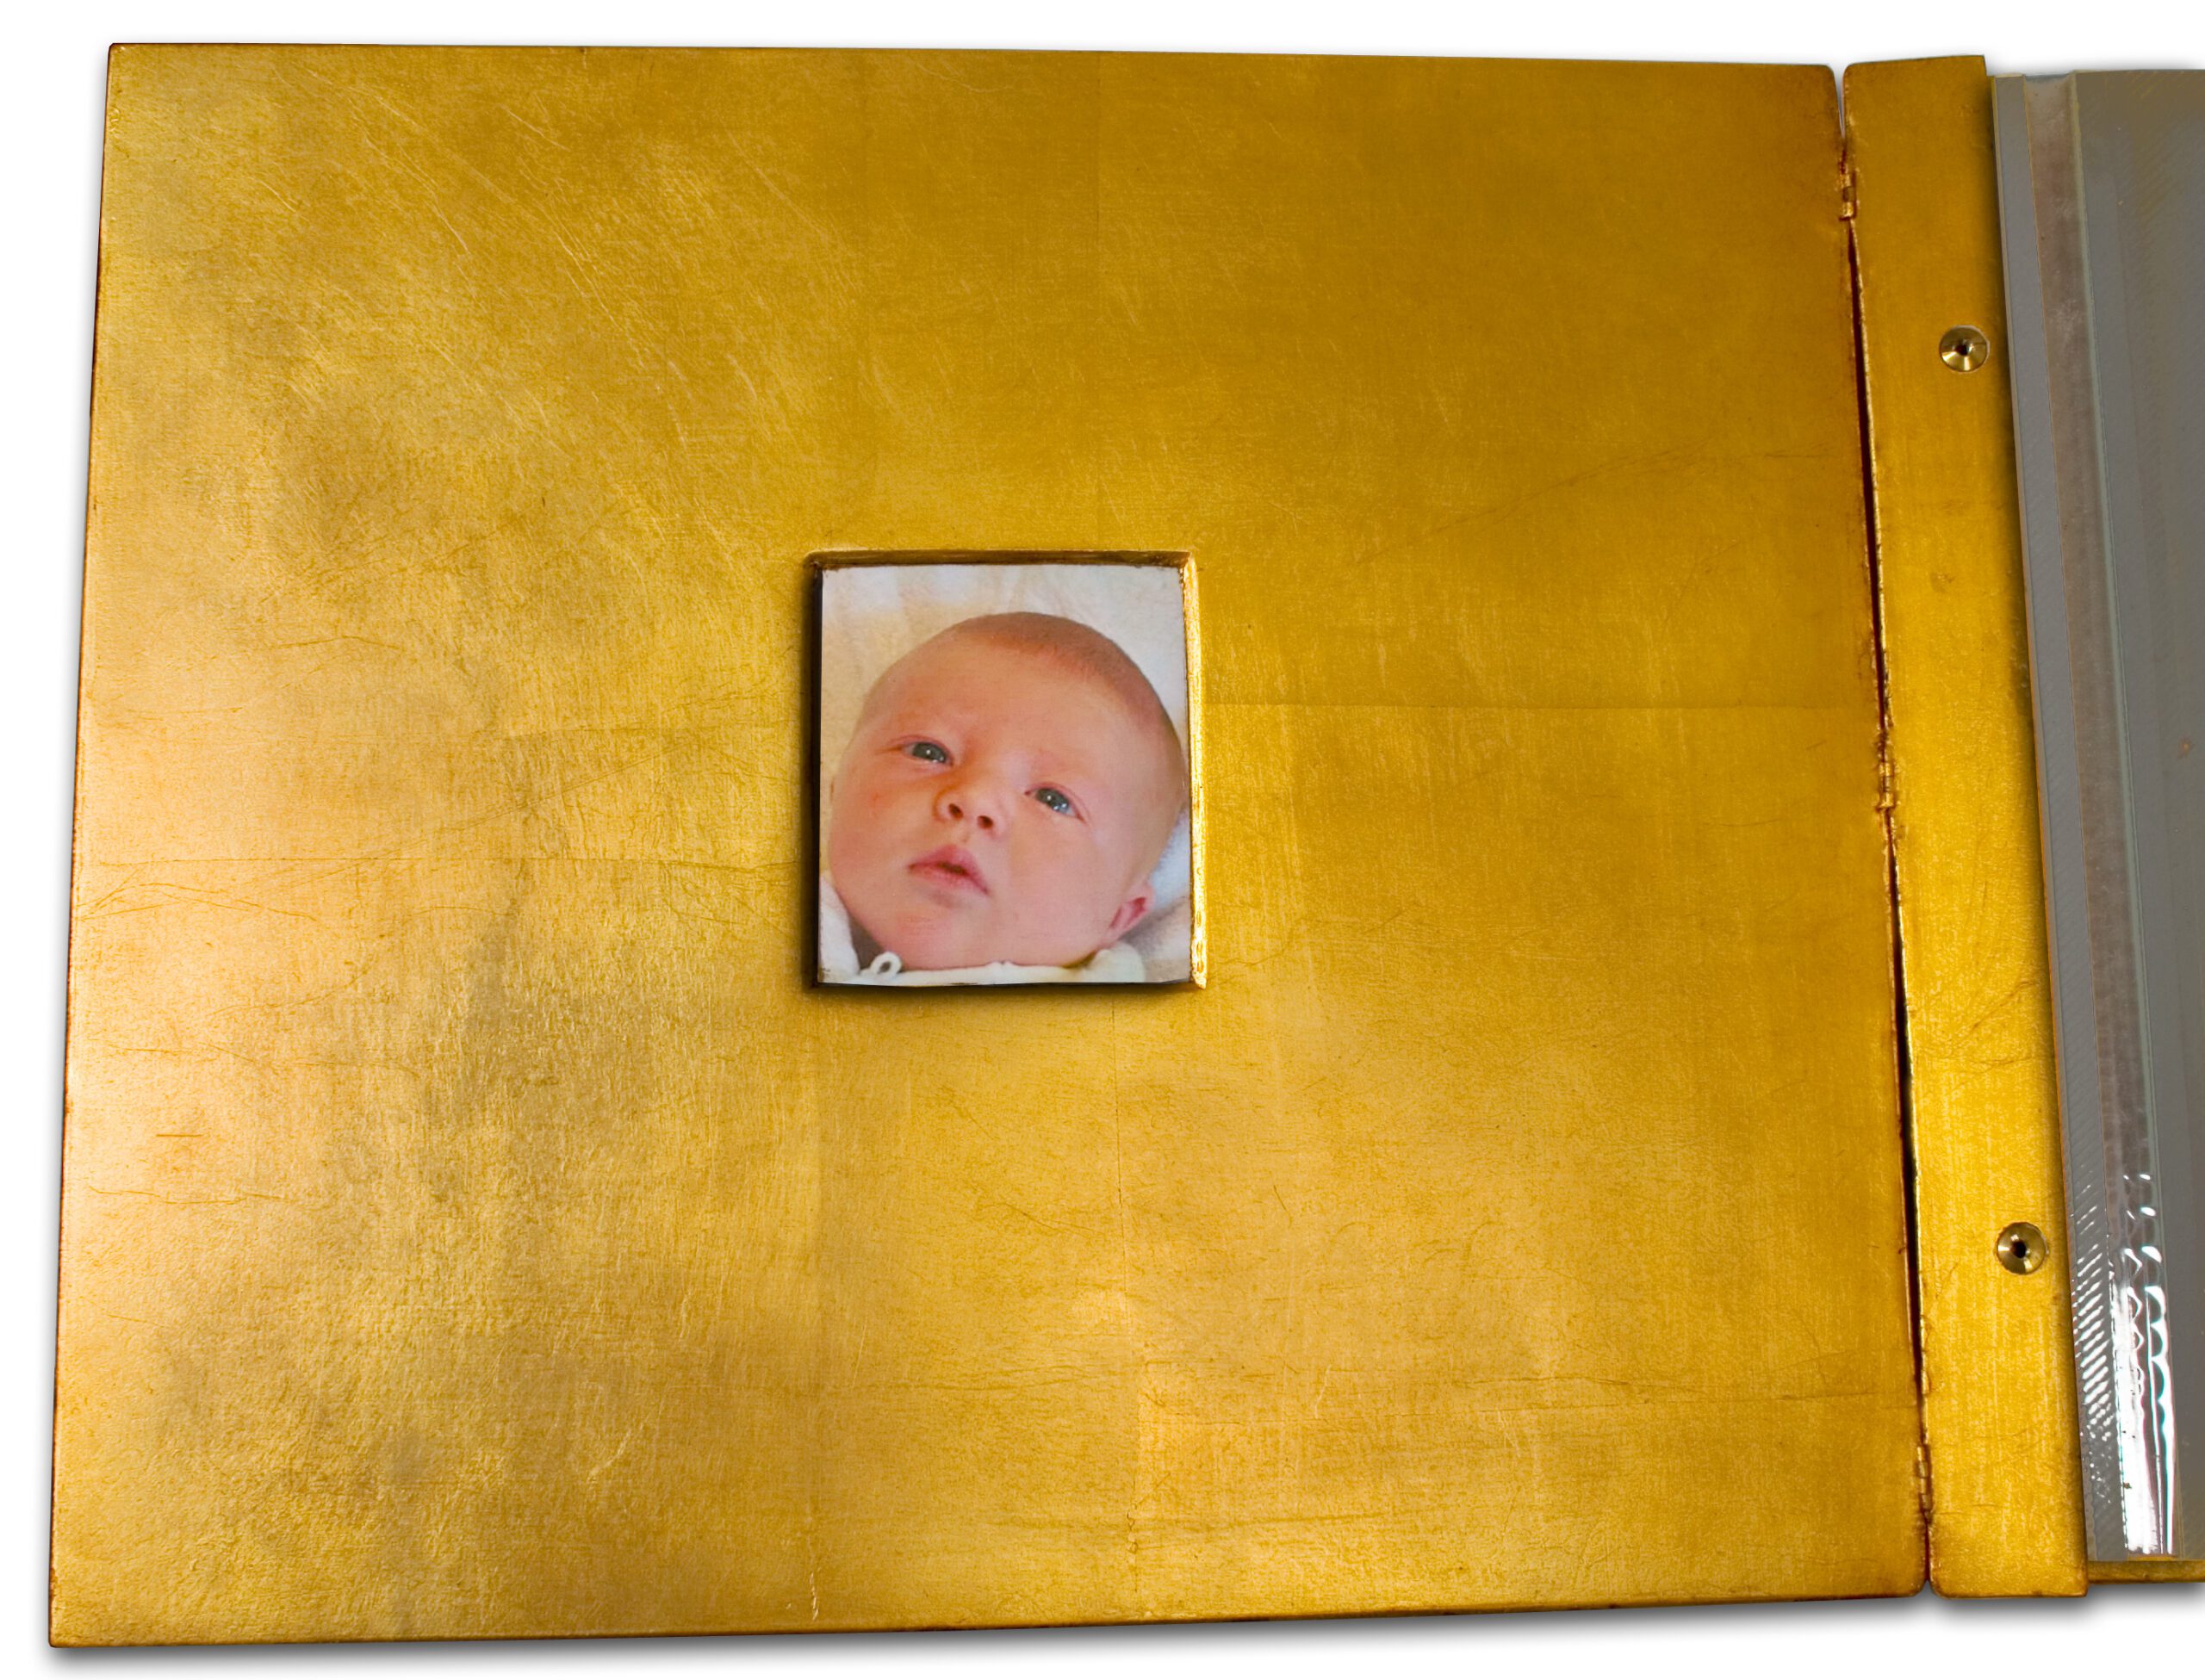 christening album inlaid picture inside front cover